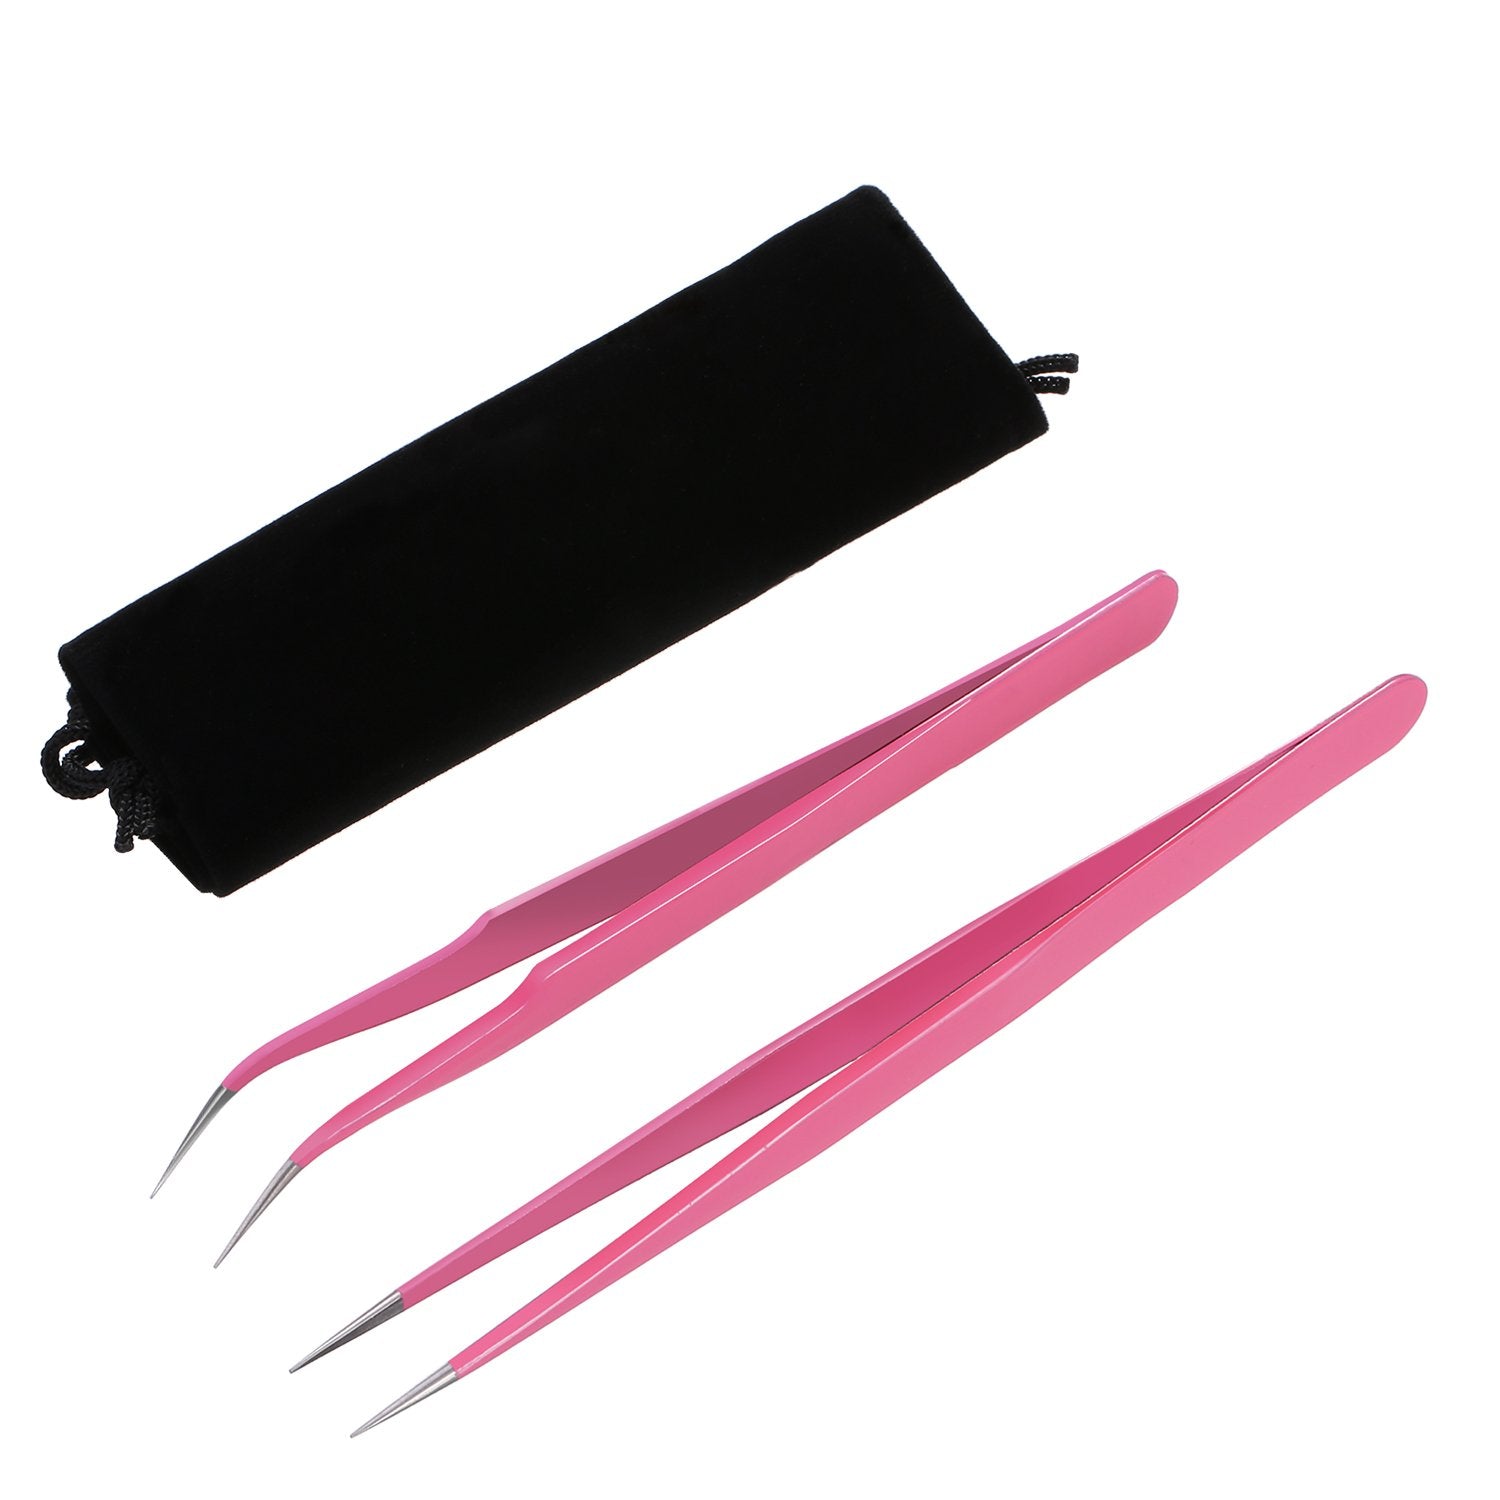 2 Pieces Straight and Curved Tip Tweezers Nipper for Eyelash Extensions, Pink Stainless Steel False Lash Application Tools